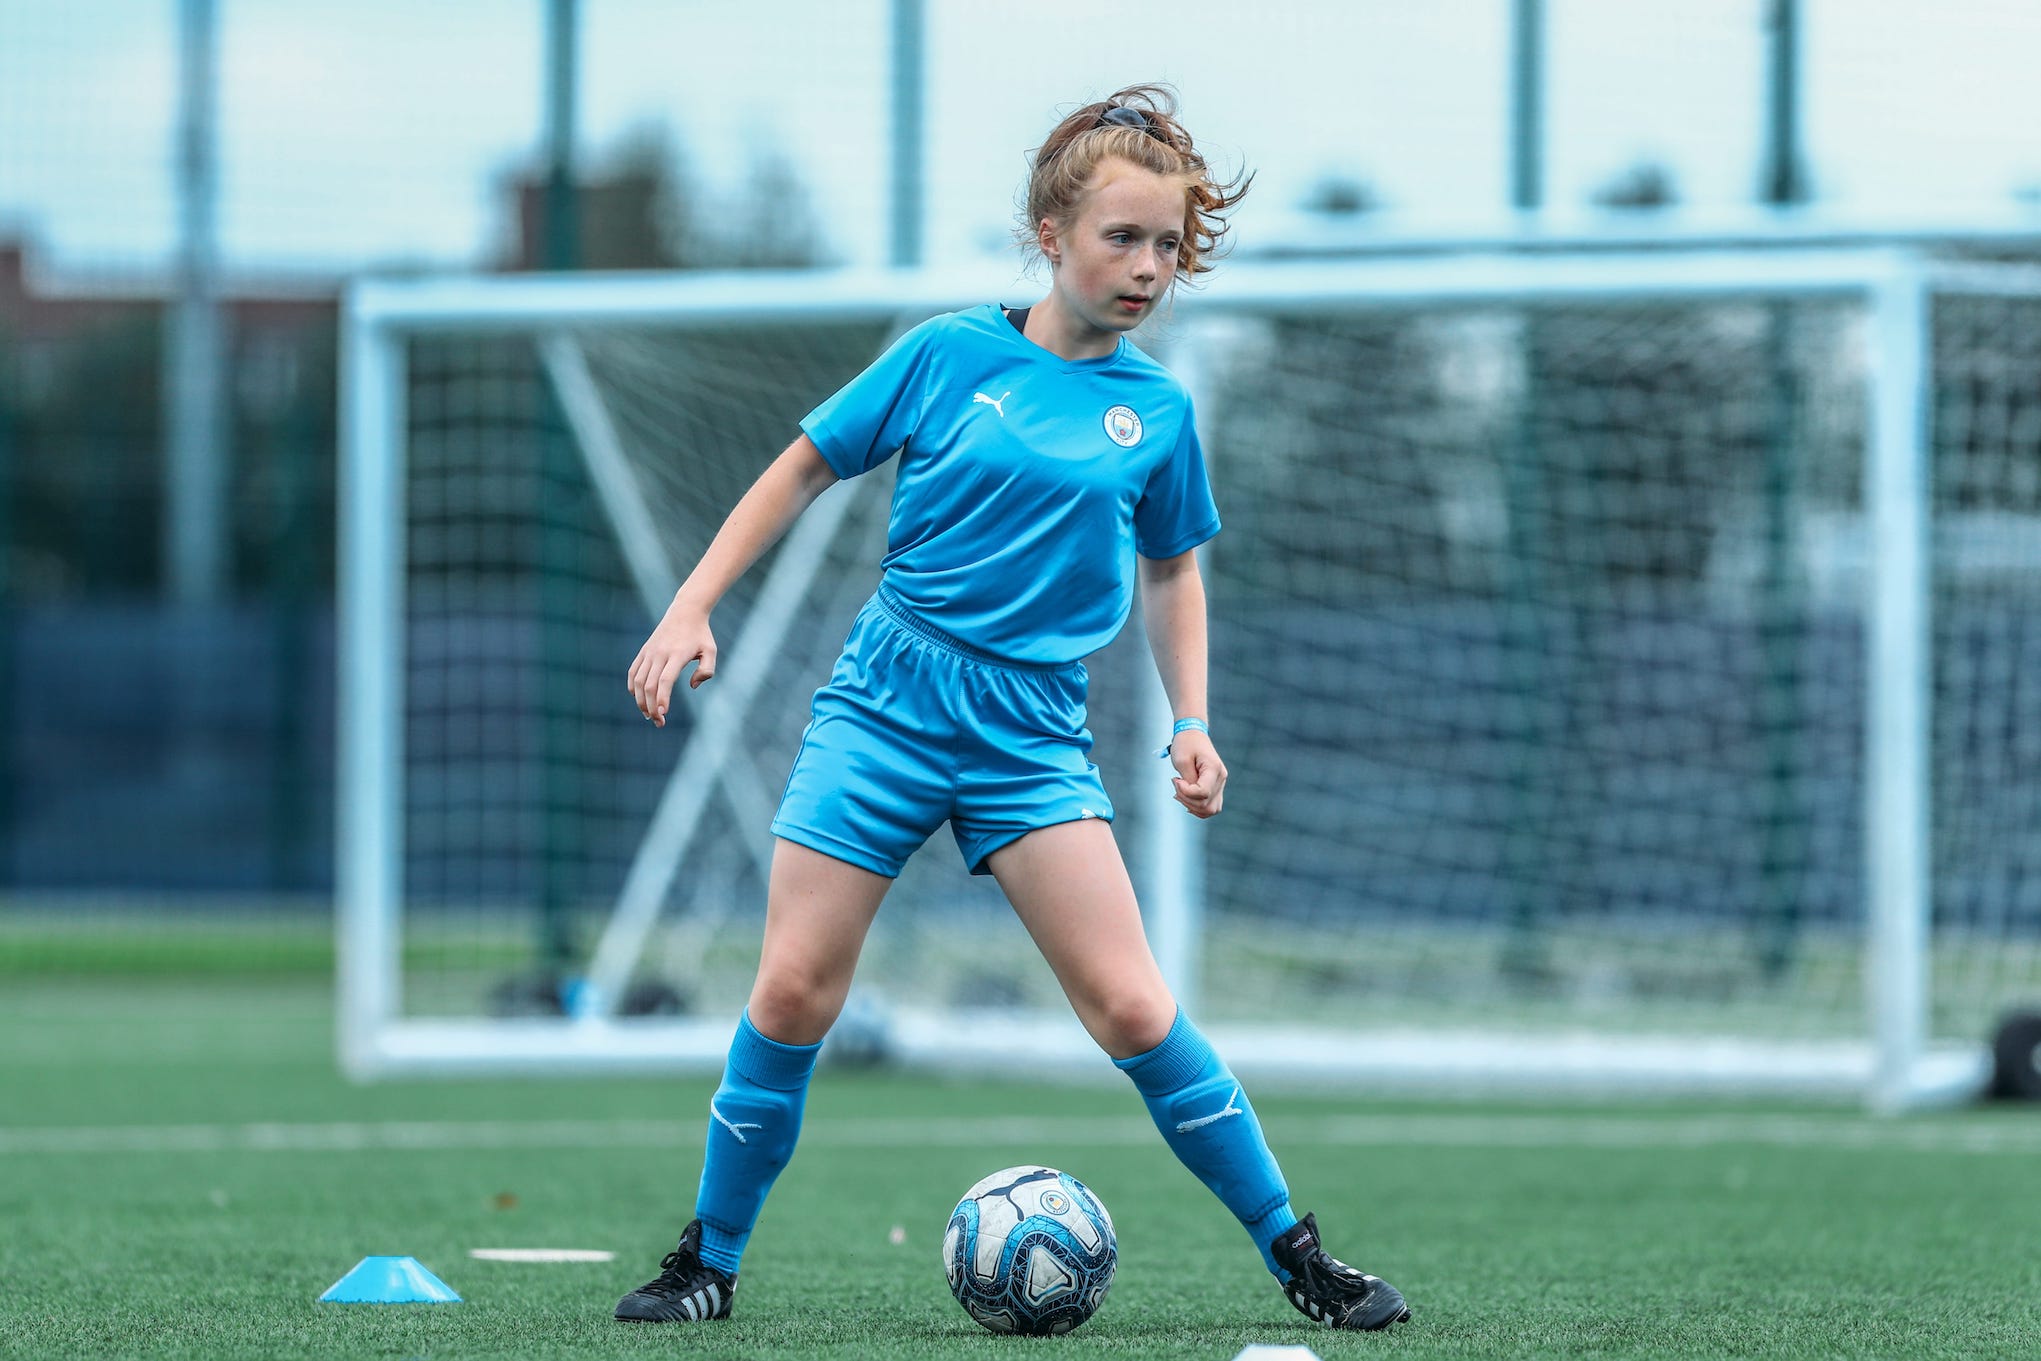 A young girl with blond hair on a football pitch. She is wearing a Manchester City Football School kit. There is a goal post in the background.